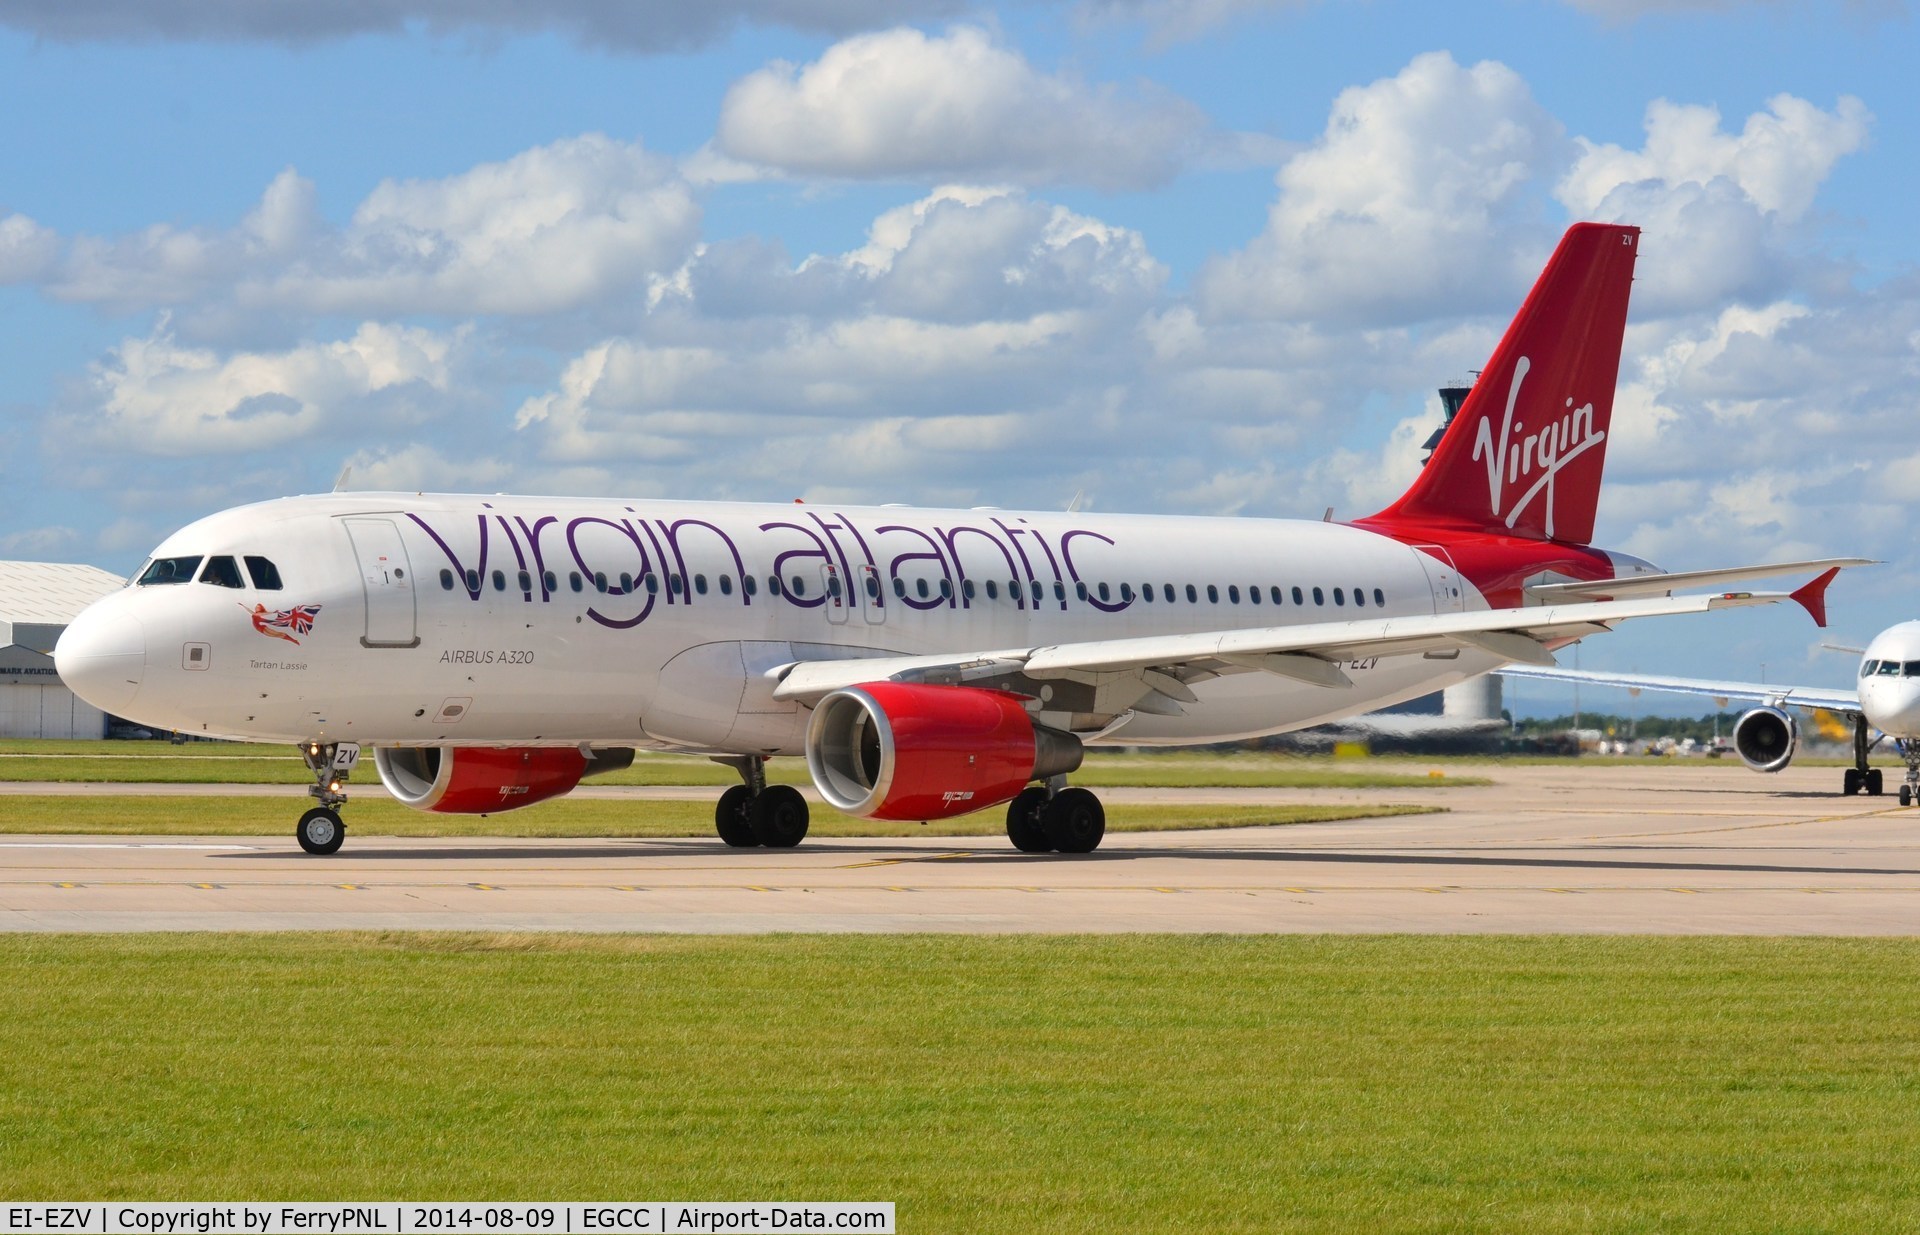 EI-EZV, 2003 Airbus A320-214 C/N 2001, VS Little Red A320 lining-up in MAN